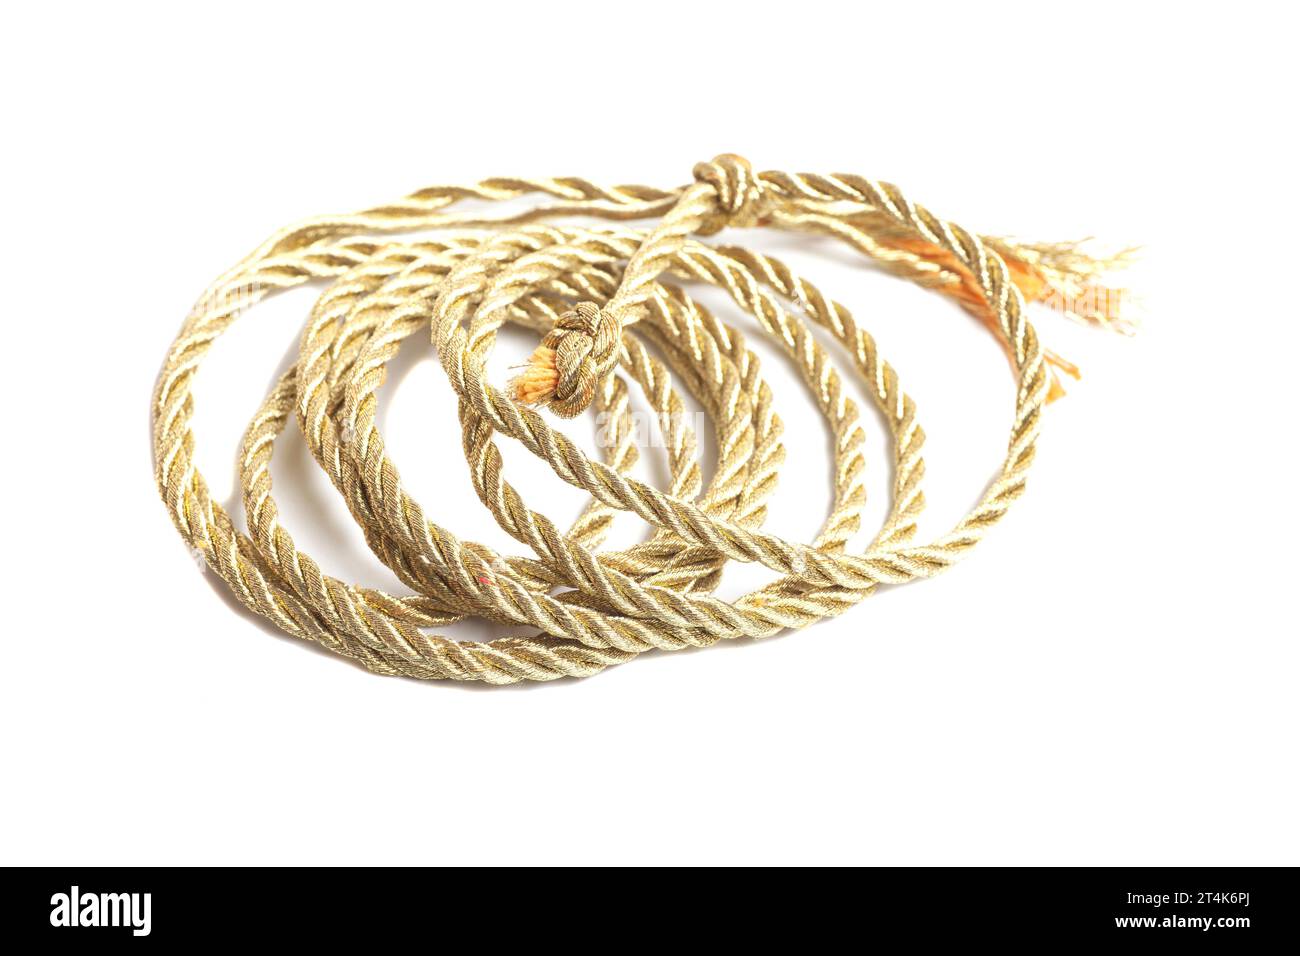 Golden rope isolated on a white background. Stock Photo